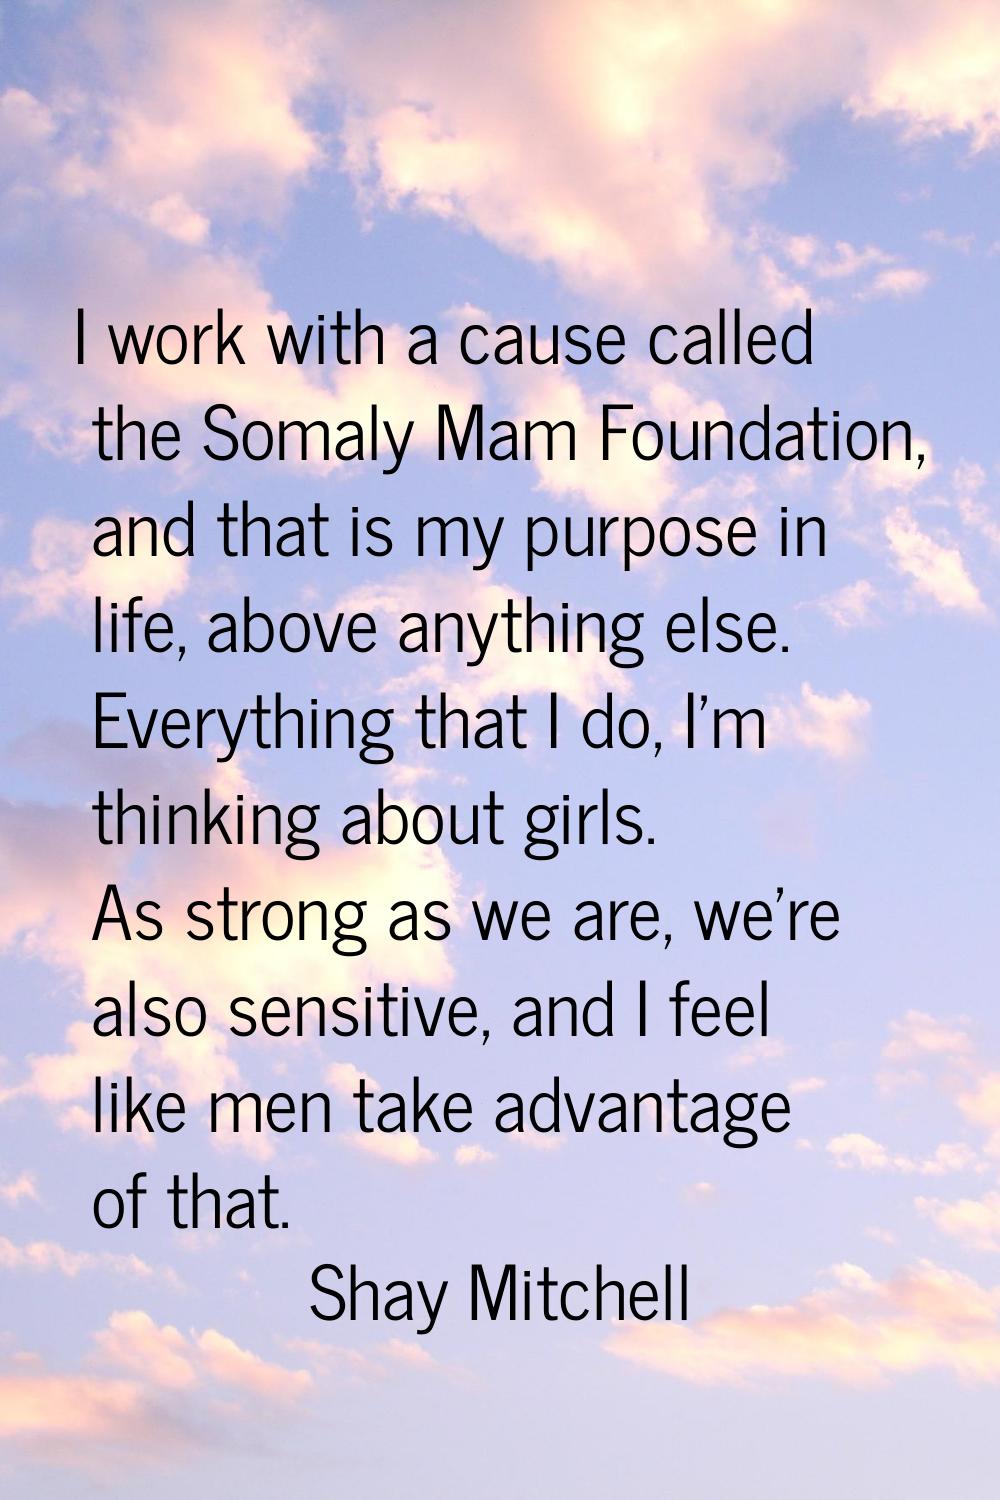 I work with a cause called the Somaly Mam Foundation, and that is my purpose in life, above anythin